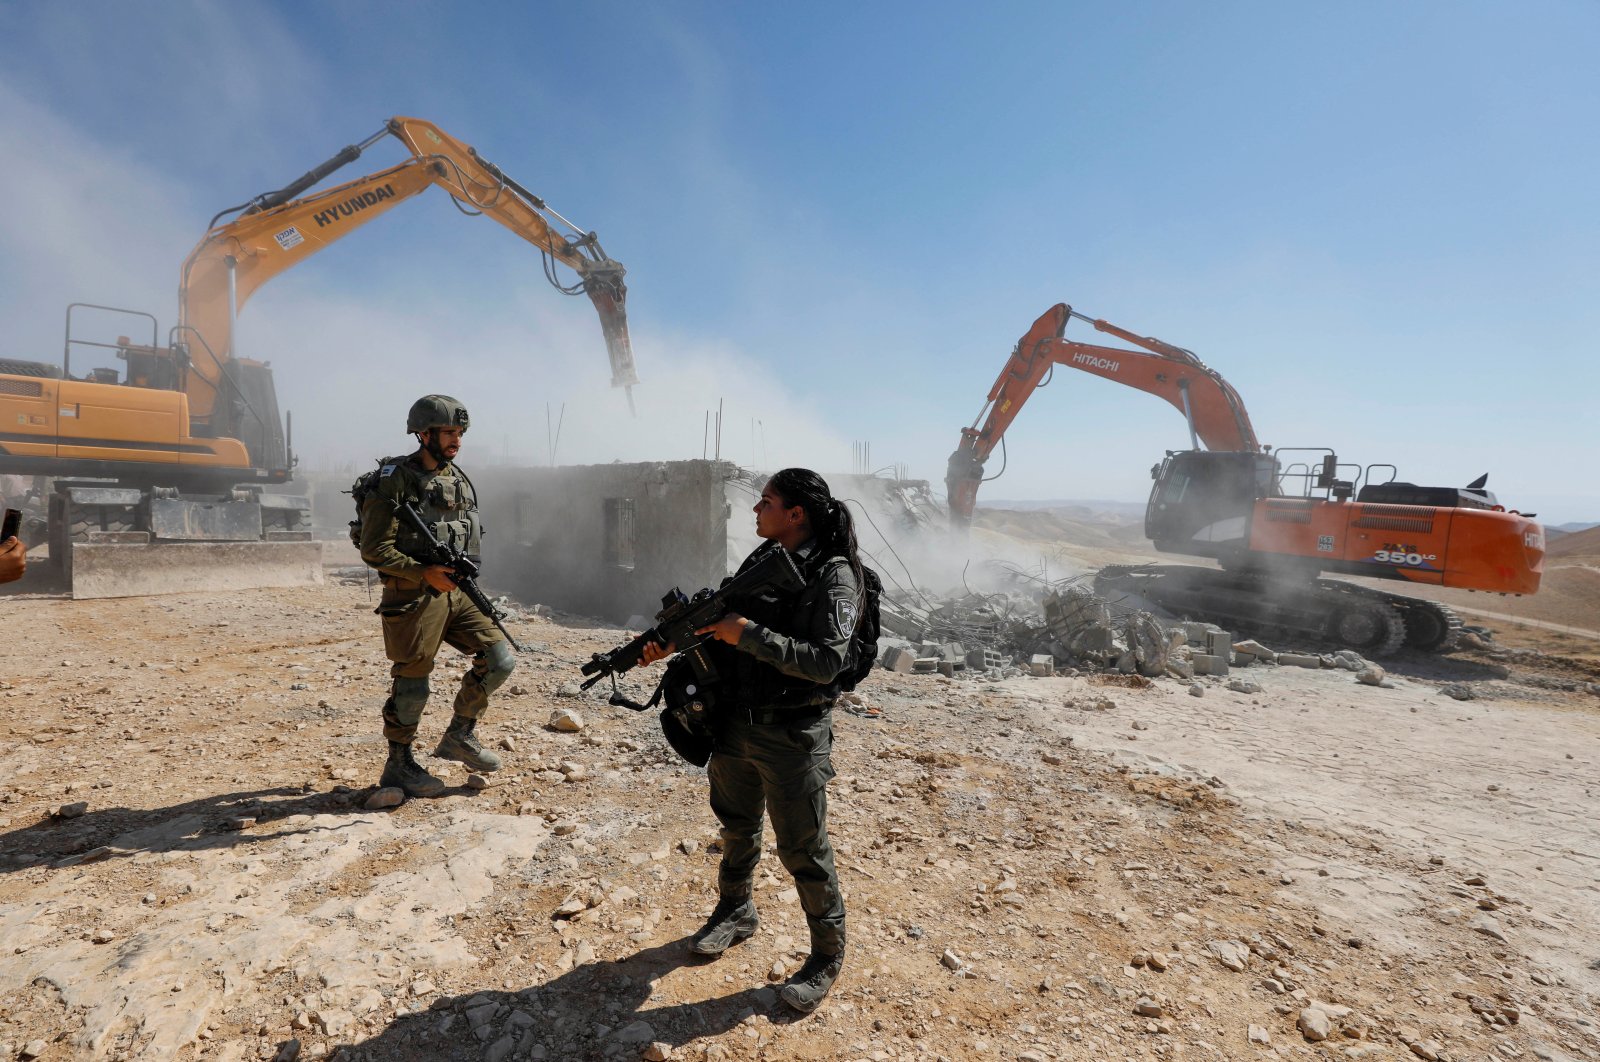 Members of Israeli forces stand guard as Israeli machineries demolish a Palestinian house in Masafer Yatta, in the Israeli-occupied West Bank, Palestine, July 4, 2022. (Reuters Photo)